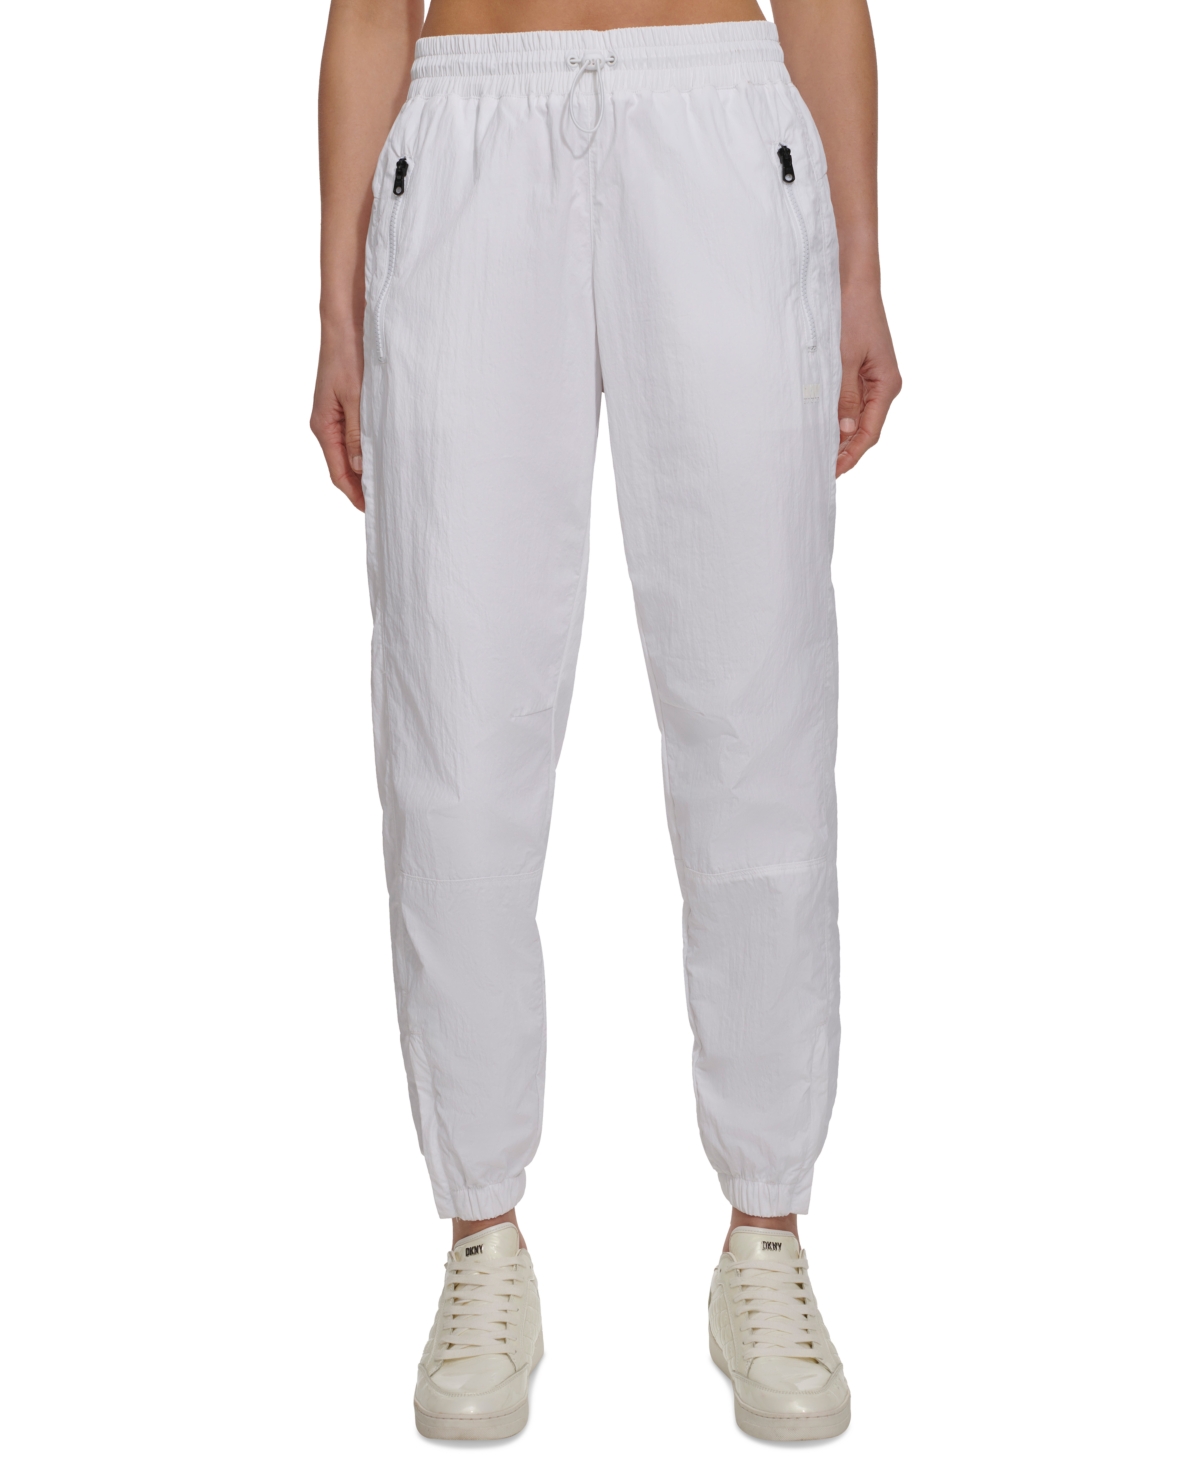 Sports Women's High-Rise Pull-On Joggers Pants - White